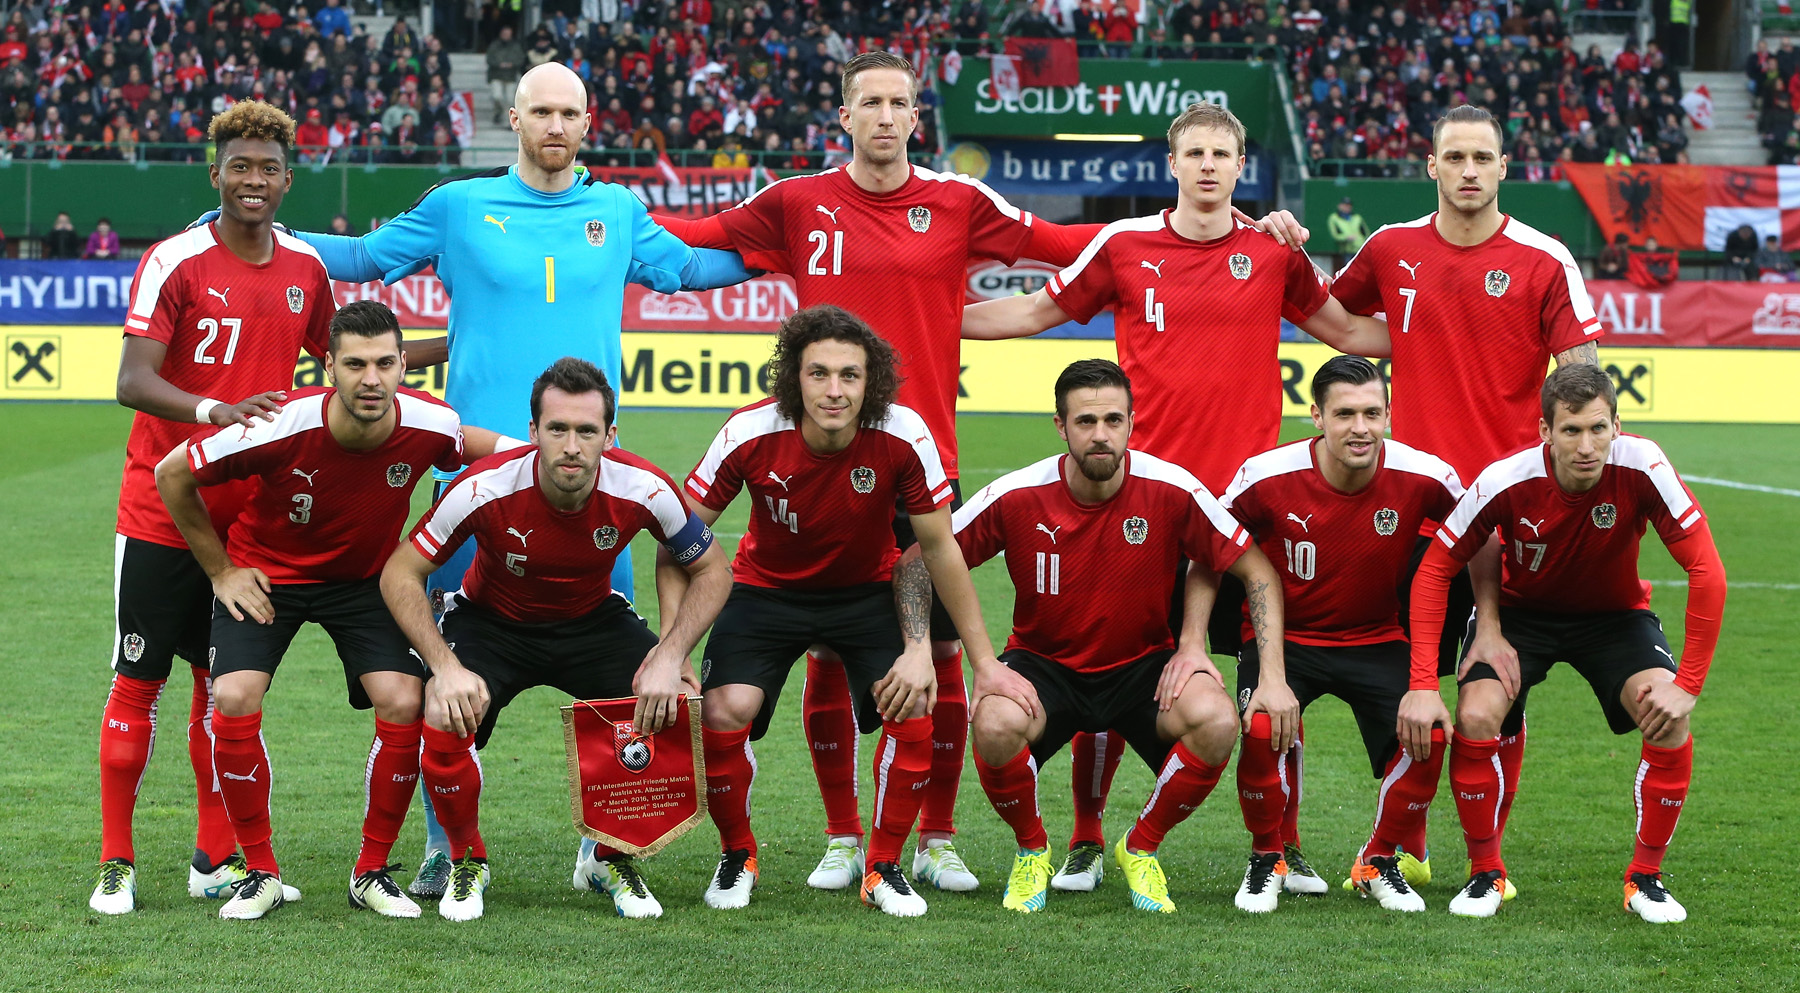 VIENNA, AUSTRIA - MARCH 26: The Austrian team pose for a team photograph during the international friendly match between Austria and Albania at the Ernst-Happel-Stadion on March 26, 2016 in Vienna, Austria. (Photo by David Rogers/Getty Images)